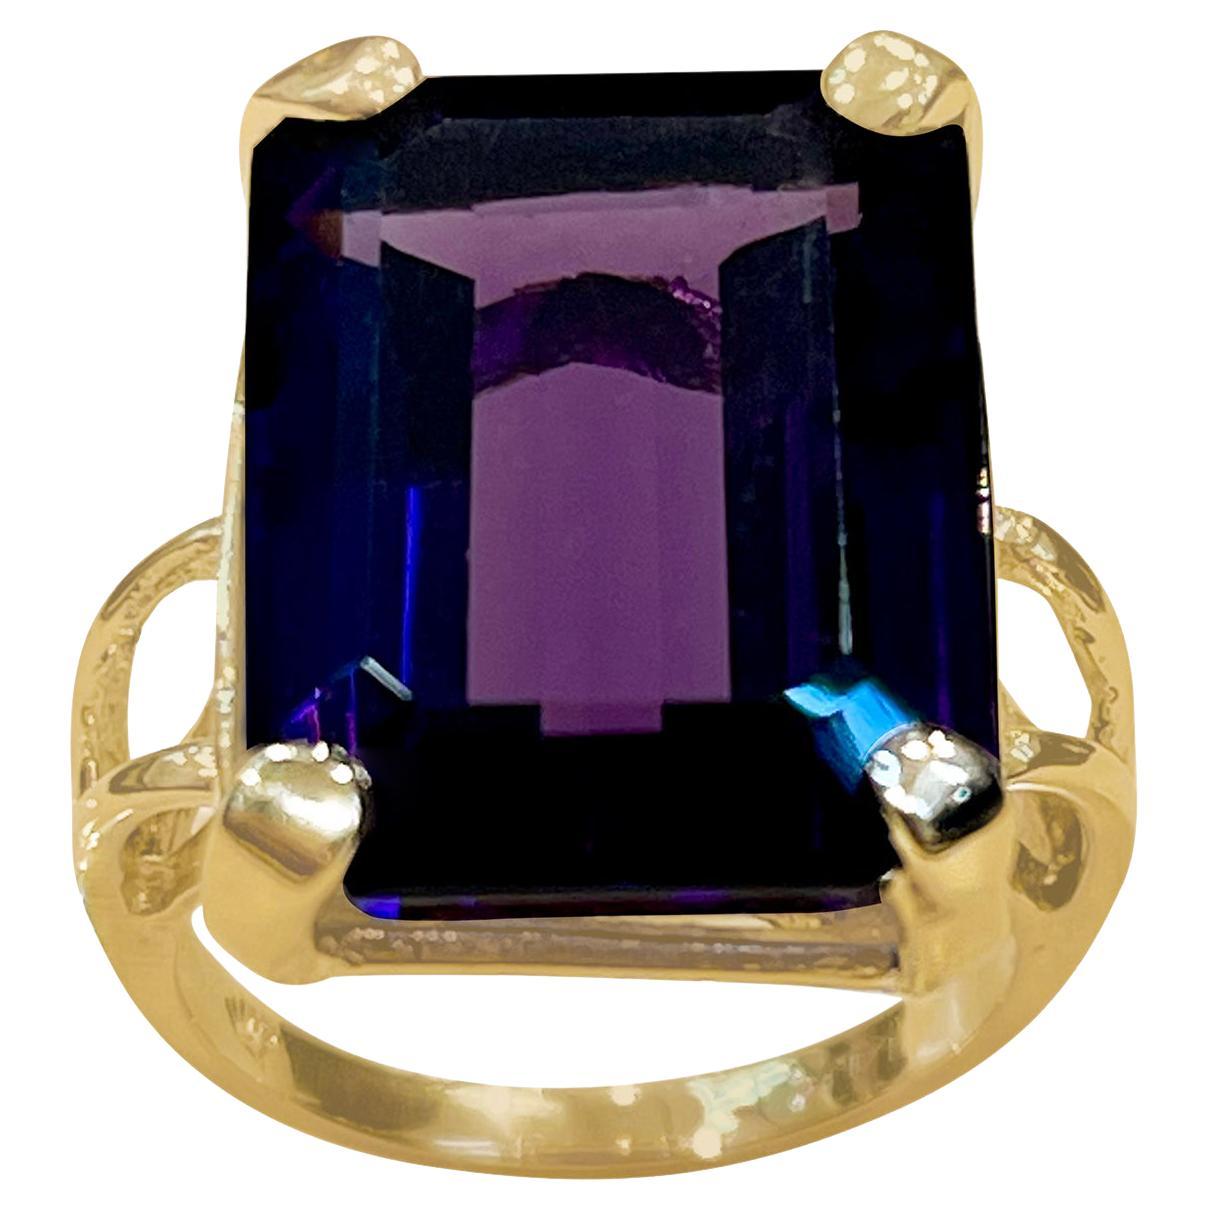 13 Carat Emerald Cut Amethyst Cocktail Ring in 14 Karat Yellow Gold For Sale